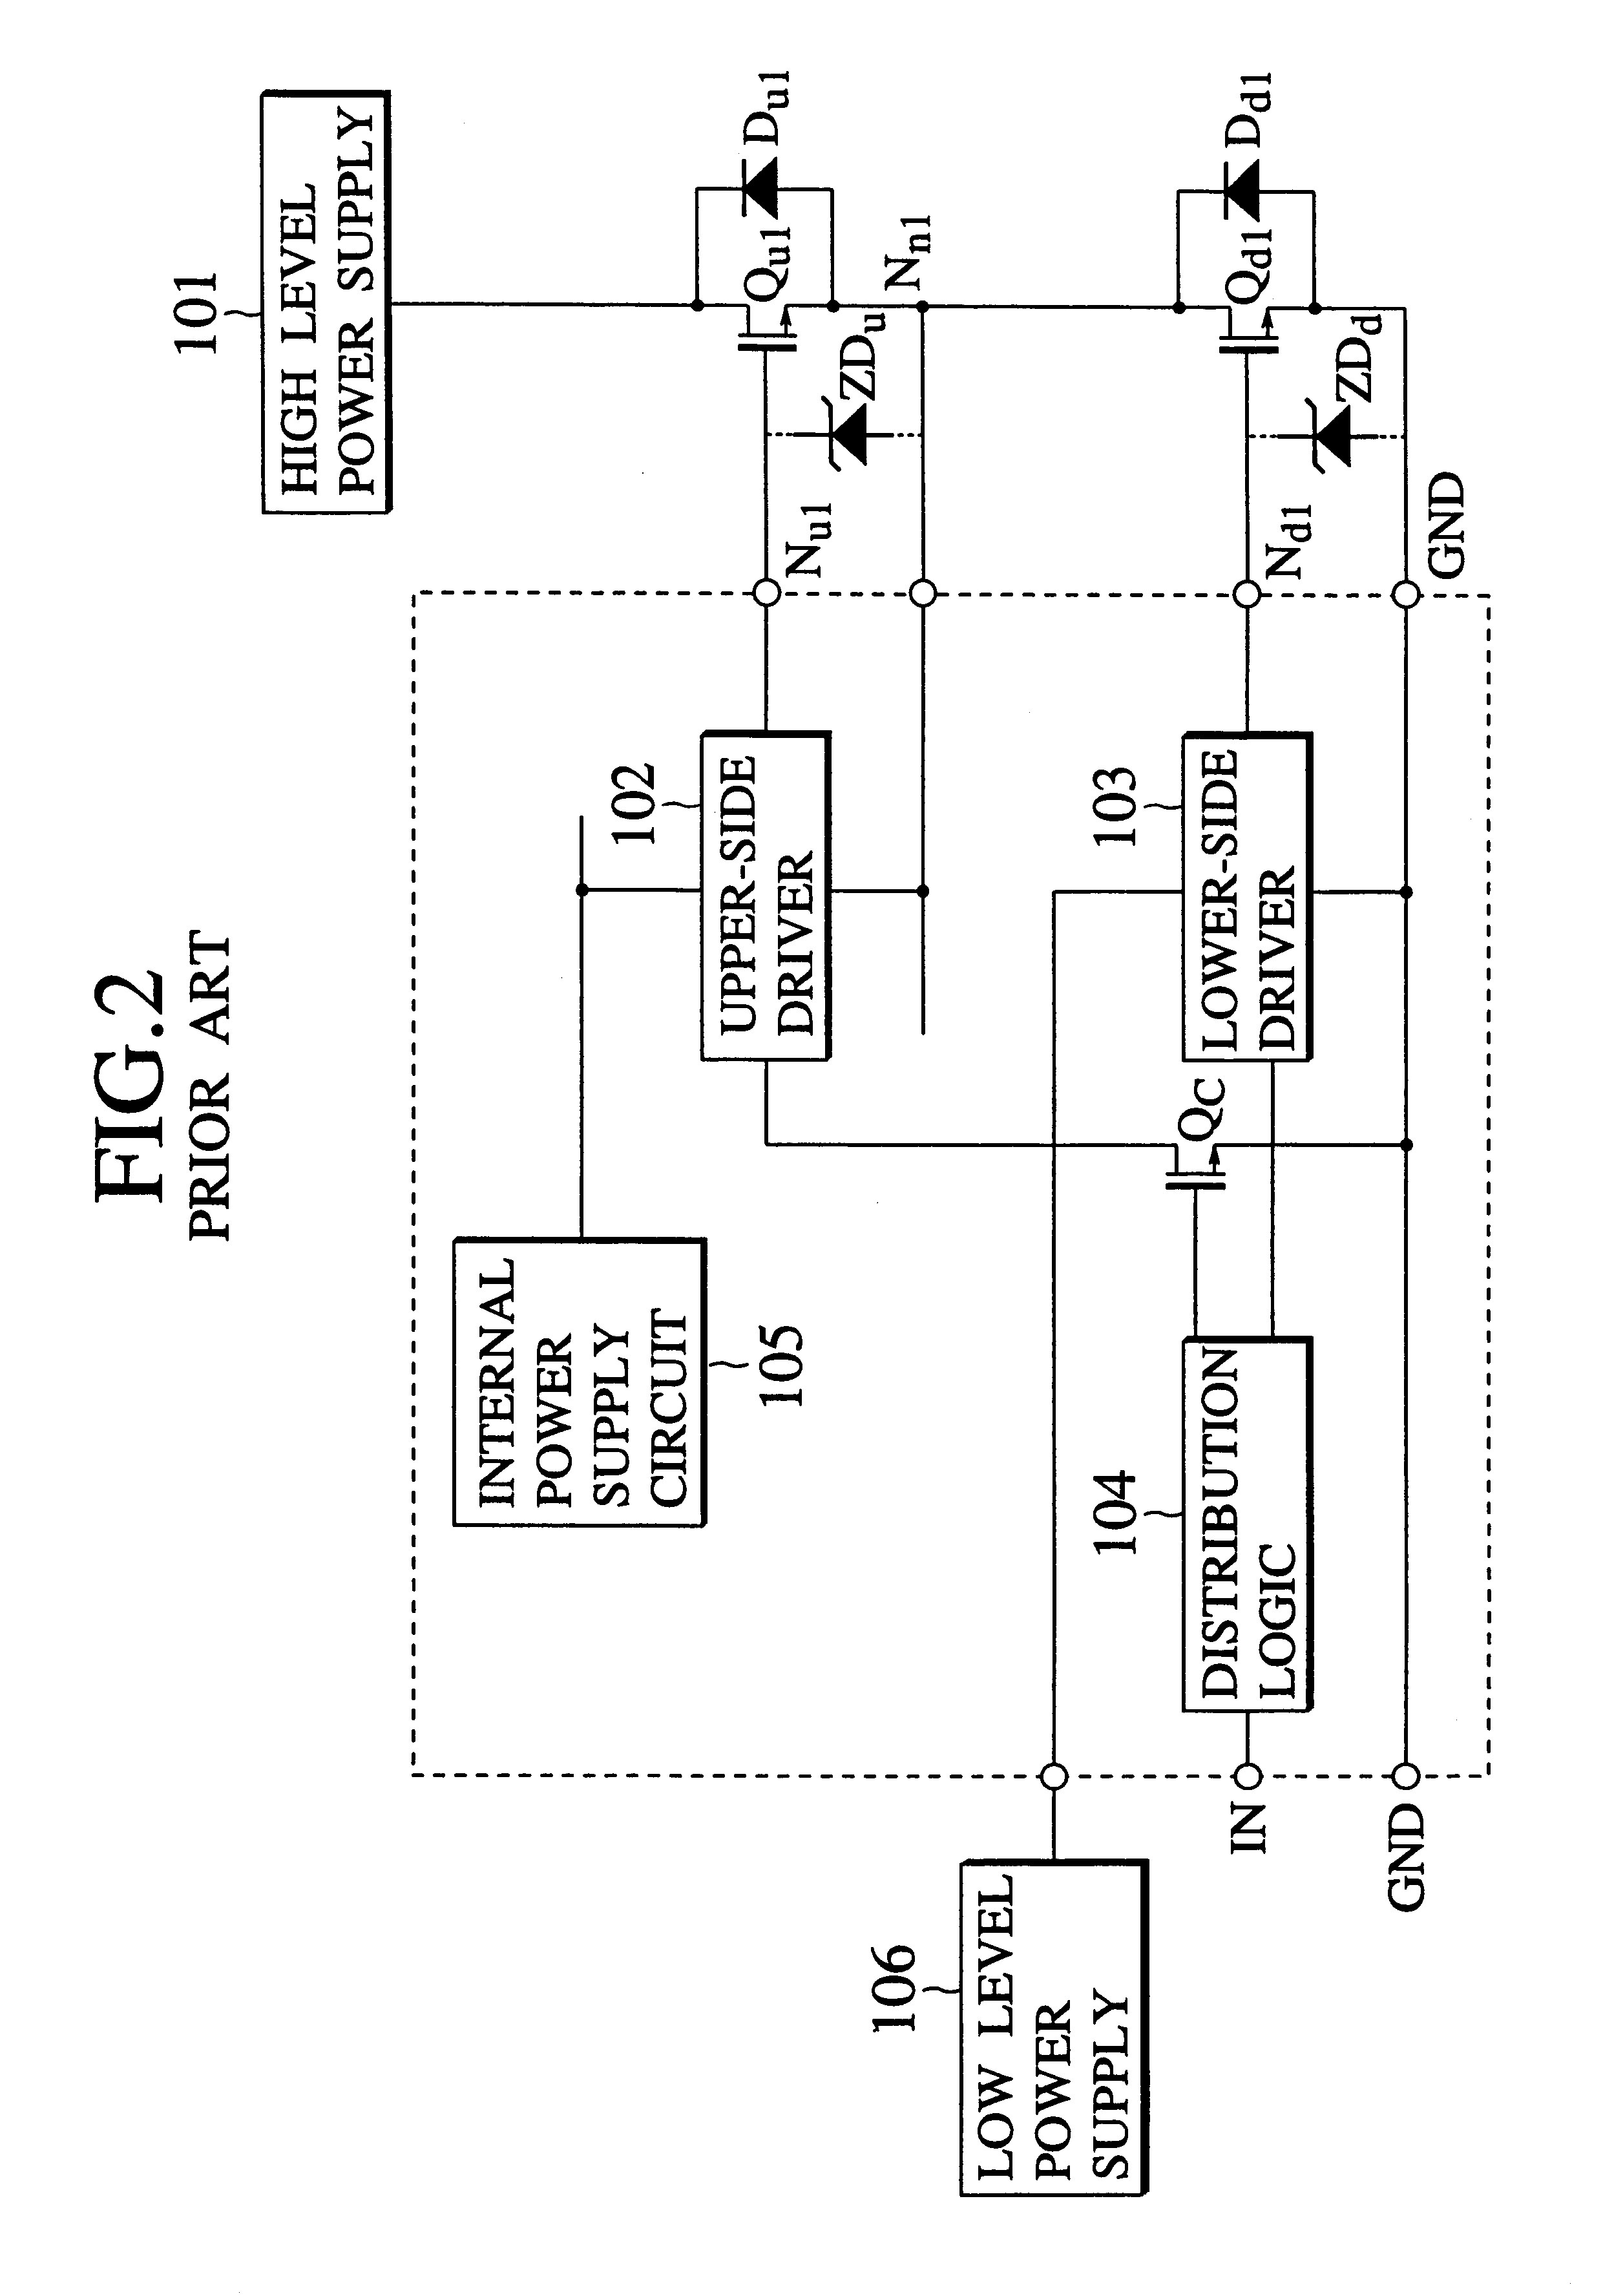 Dielectrically isolated IC driver having upper-side and lower-side arm drivers and power IC having the same